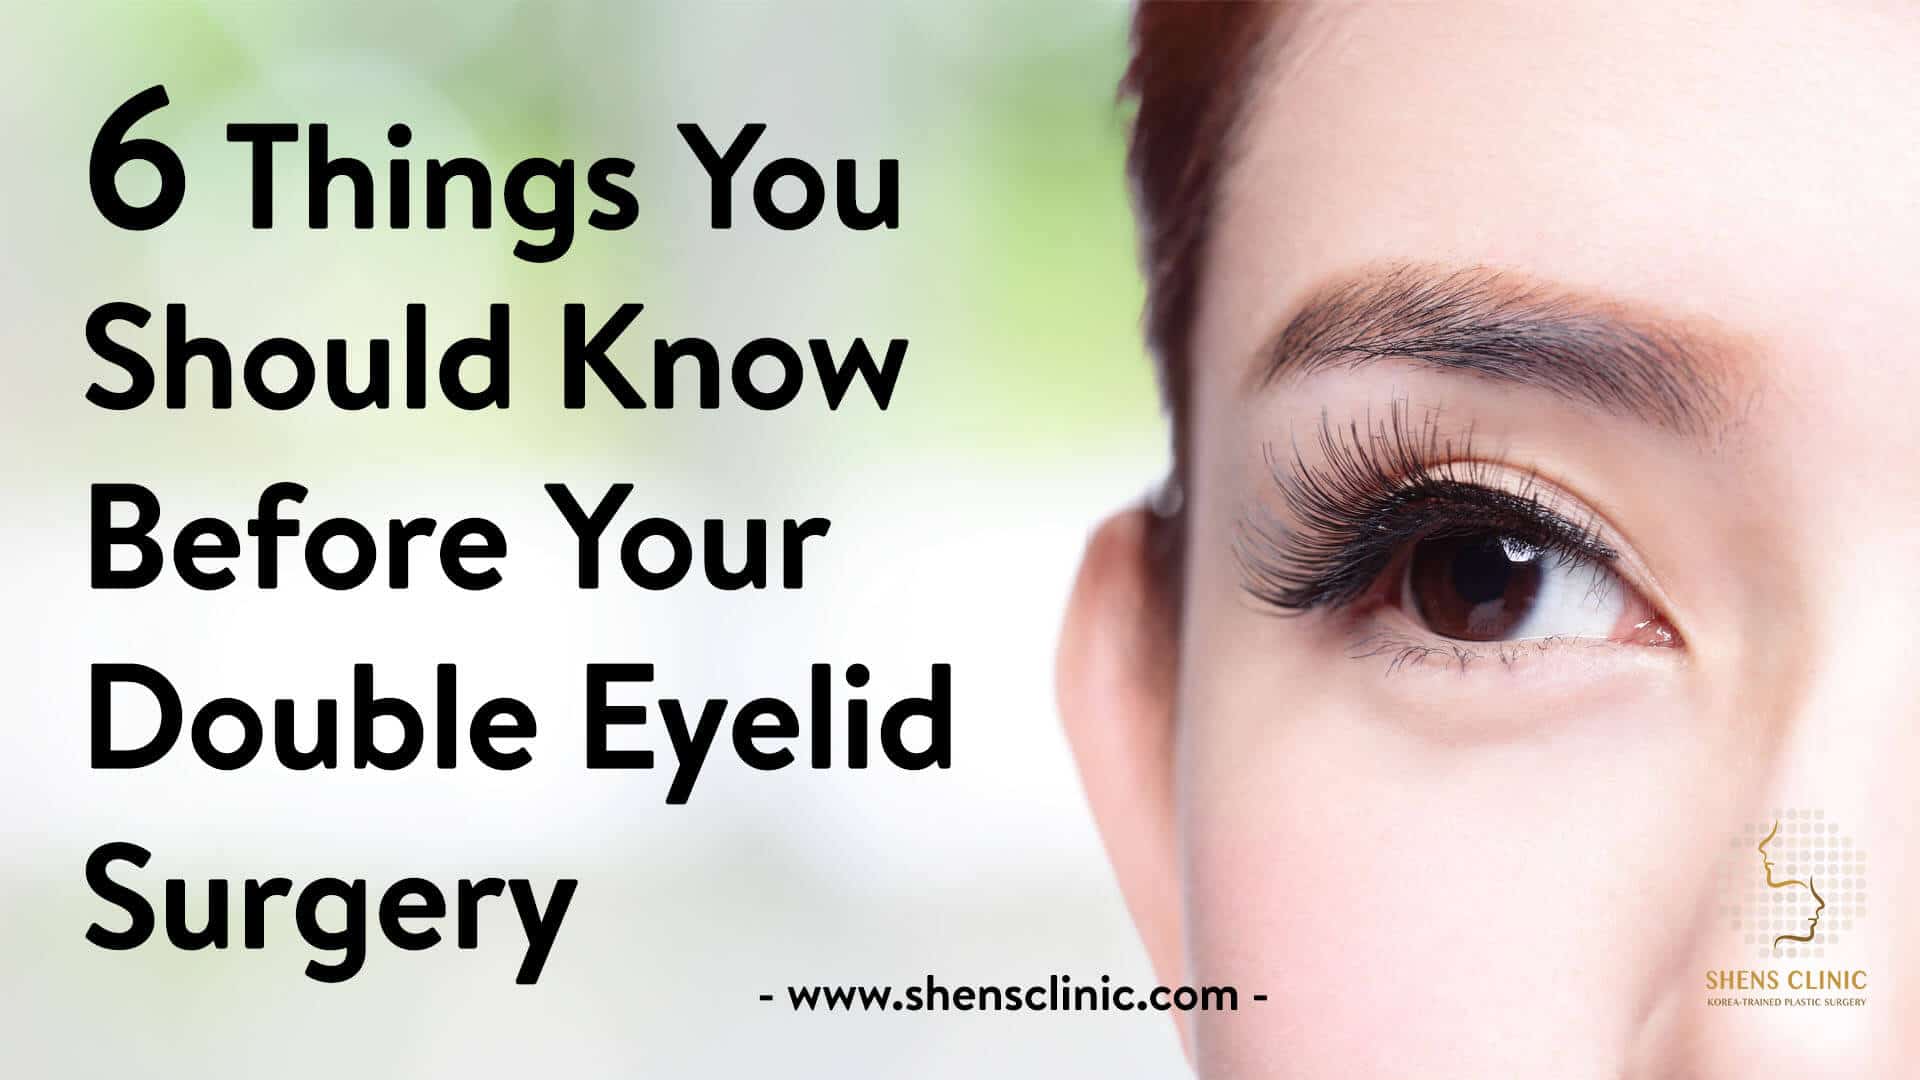 6 Things to Know Before Your Double Eyelid Surgery